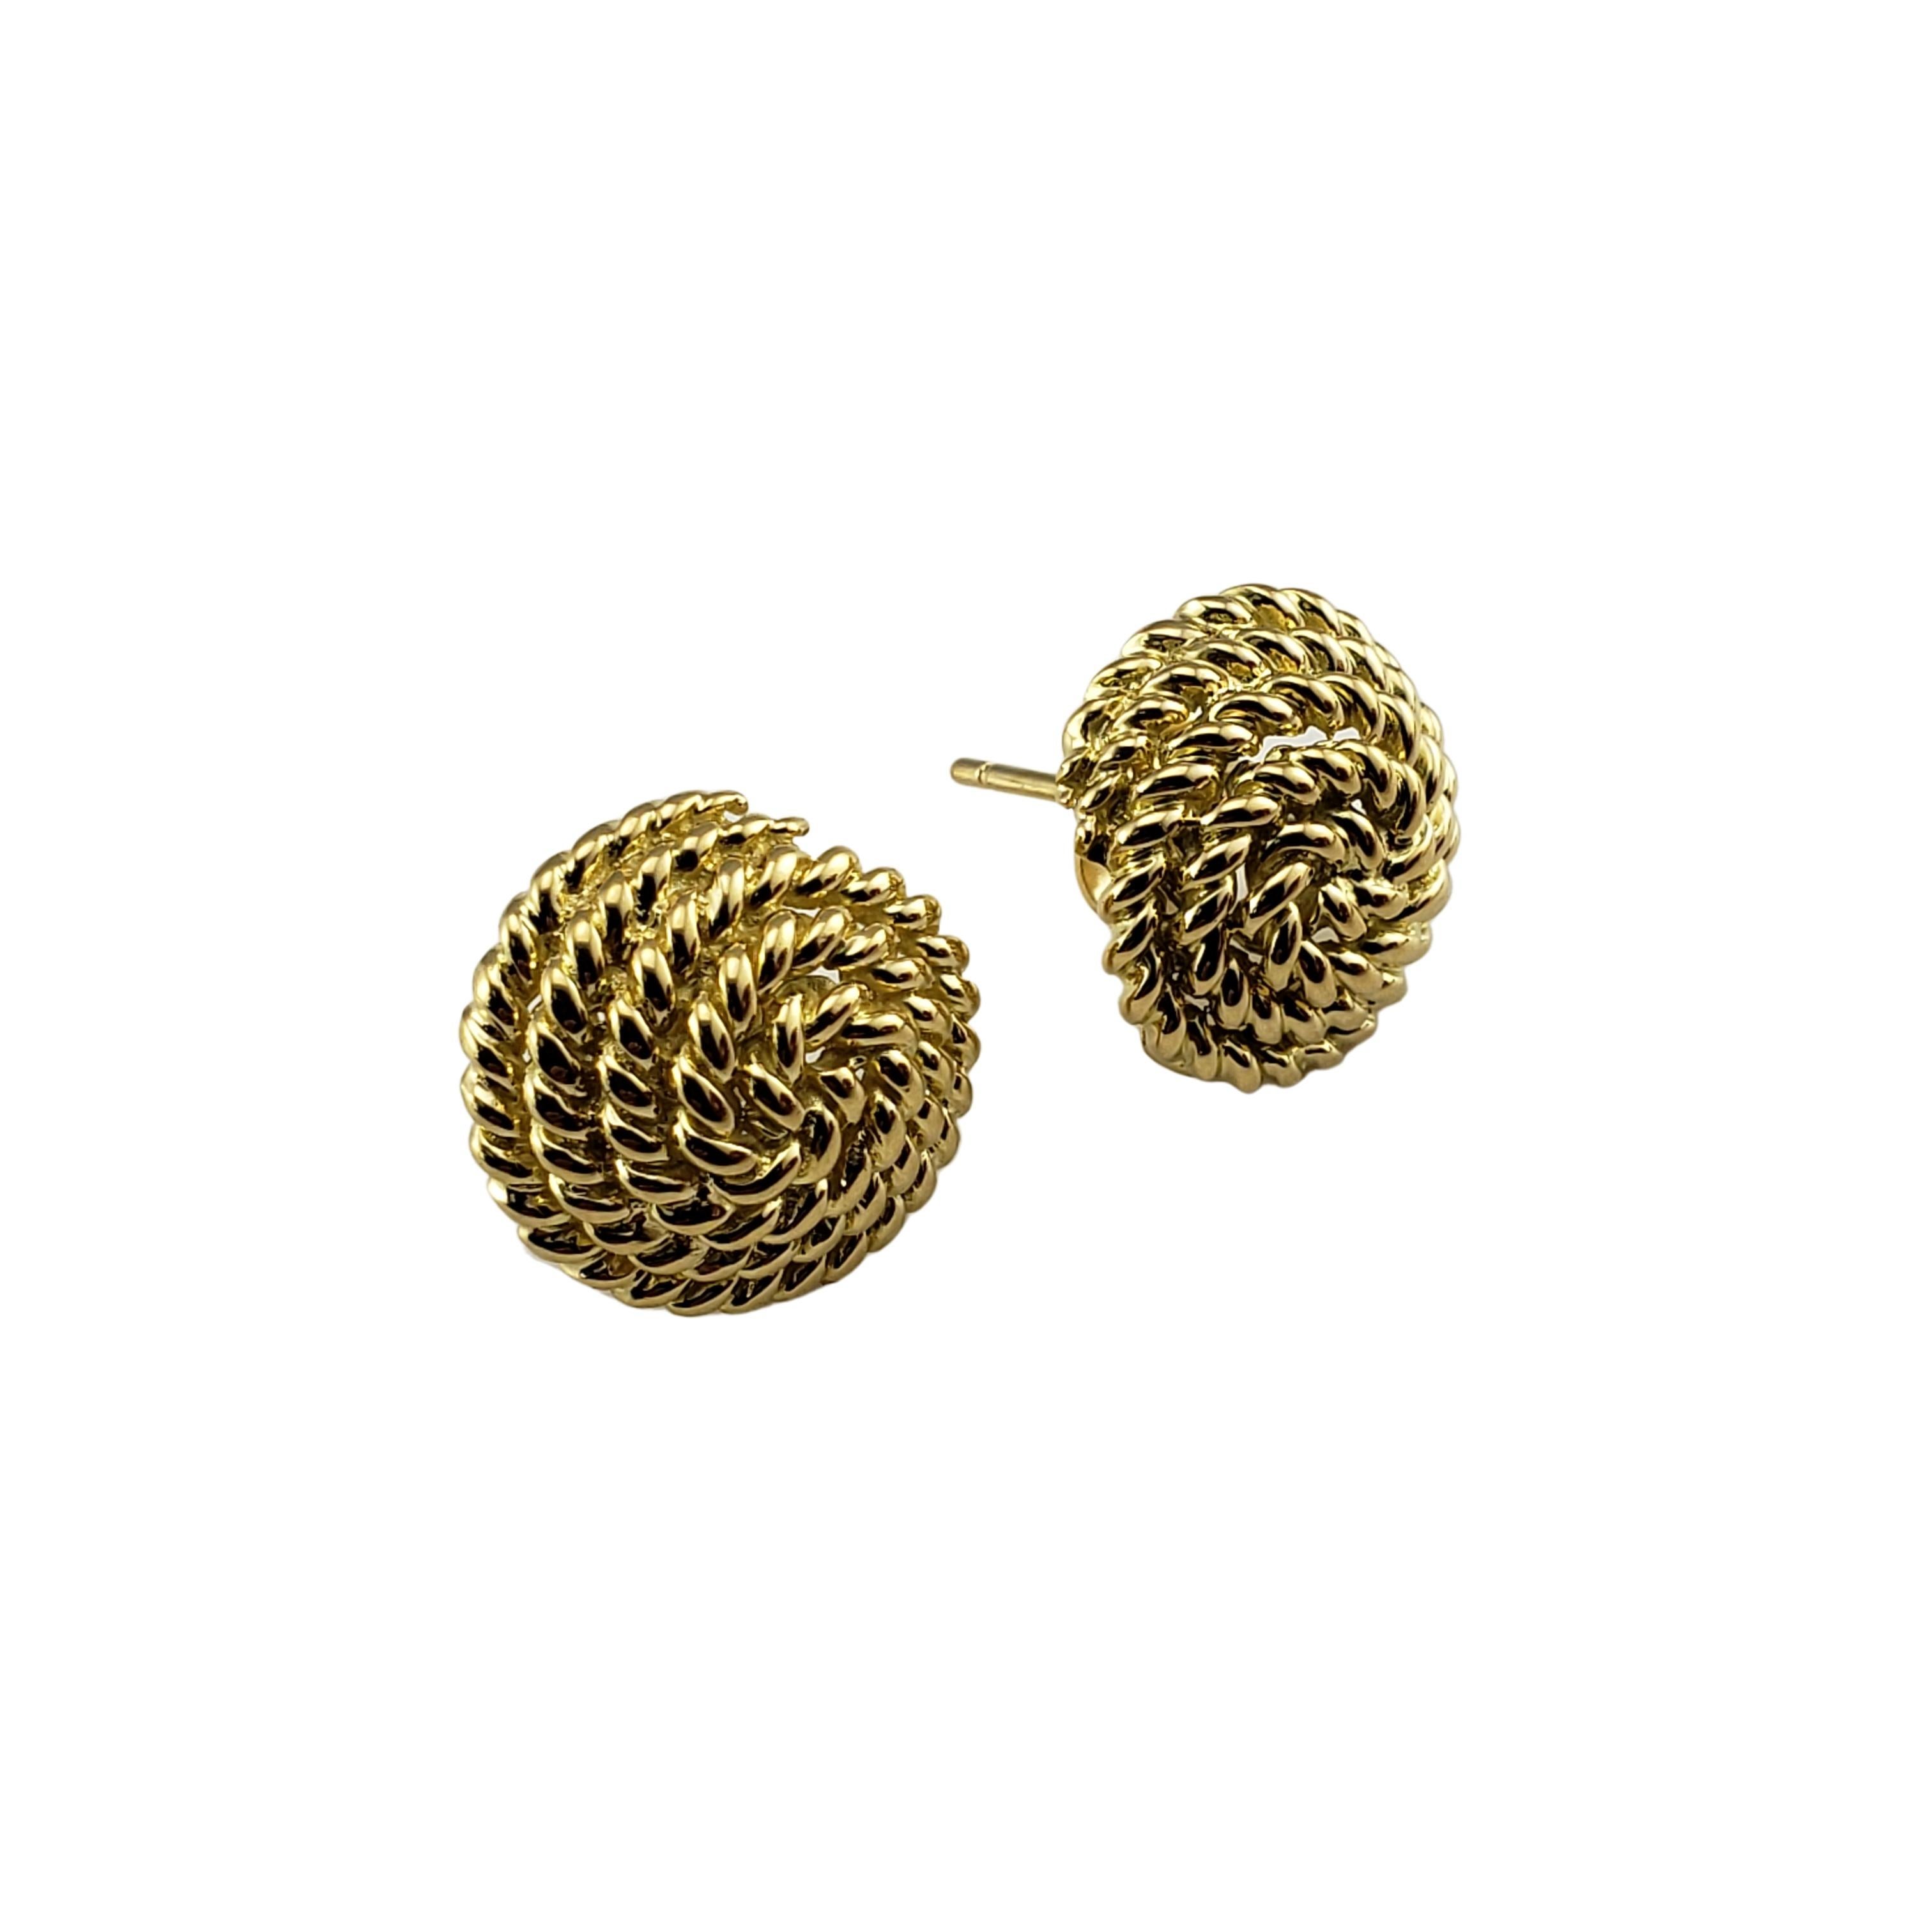 Vintage Tiffany & Co 18 Karat Yellow Gold Coiled Rope Earrings-

These elegant earrings are crafted in meticulously detailed 18K yellow gold by Tiffany & Co. Push back closures.

Size: 14 mm

Weight: 5.1 dwt. / 8.0 gr.

Hallmark: TIFFANY & CO